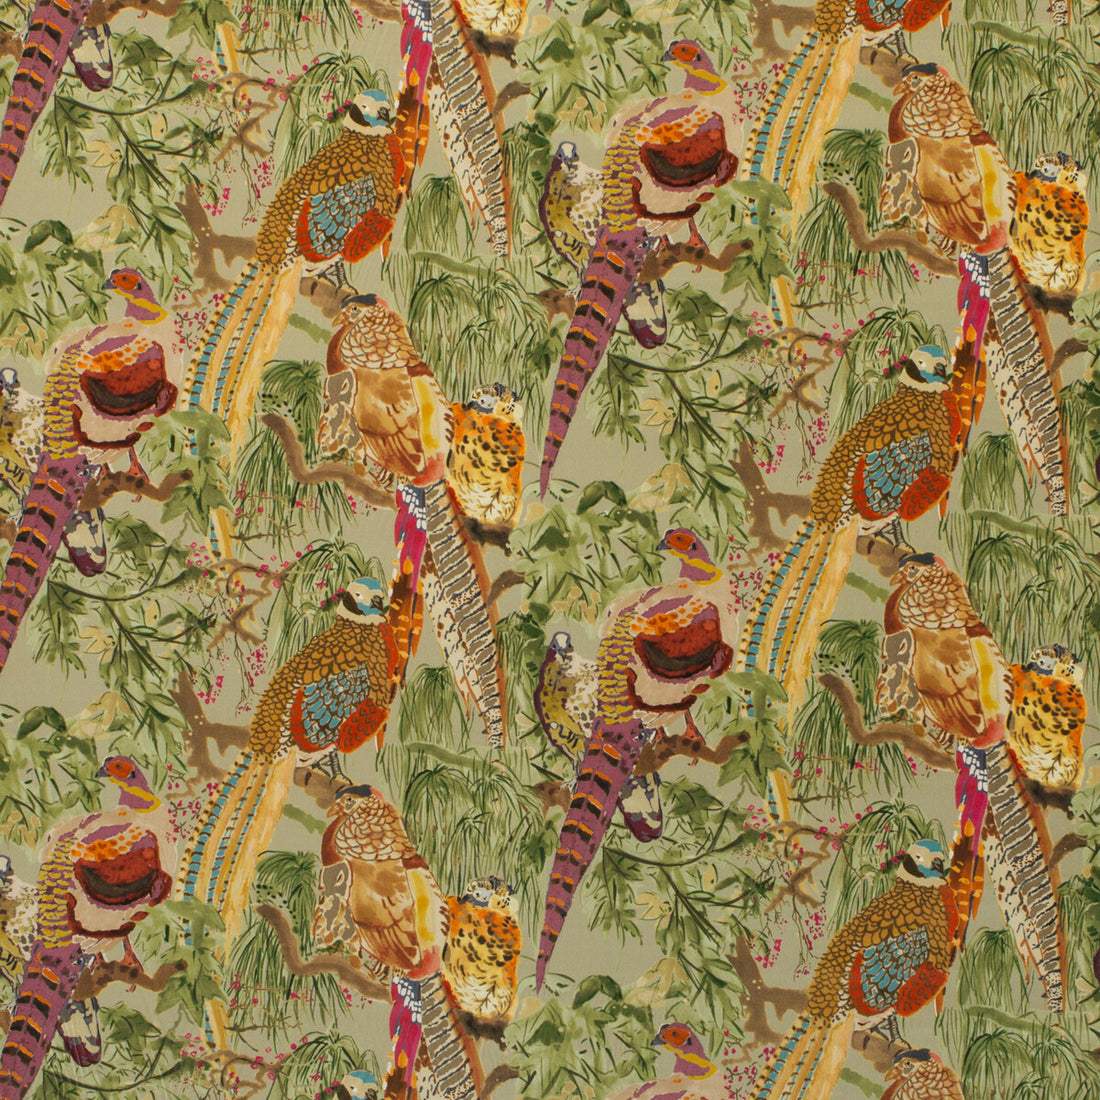 Game Birds Velvet fabric in fig/multi color - pattern FD268.H46.0 - by Mulberry in the Bohemian Romance collection